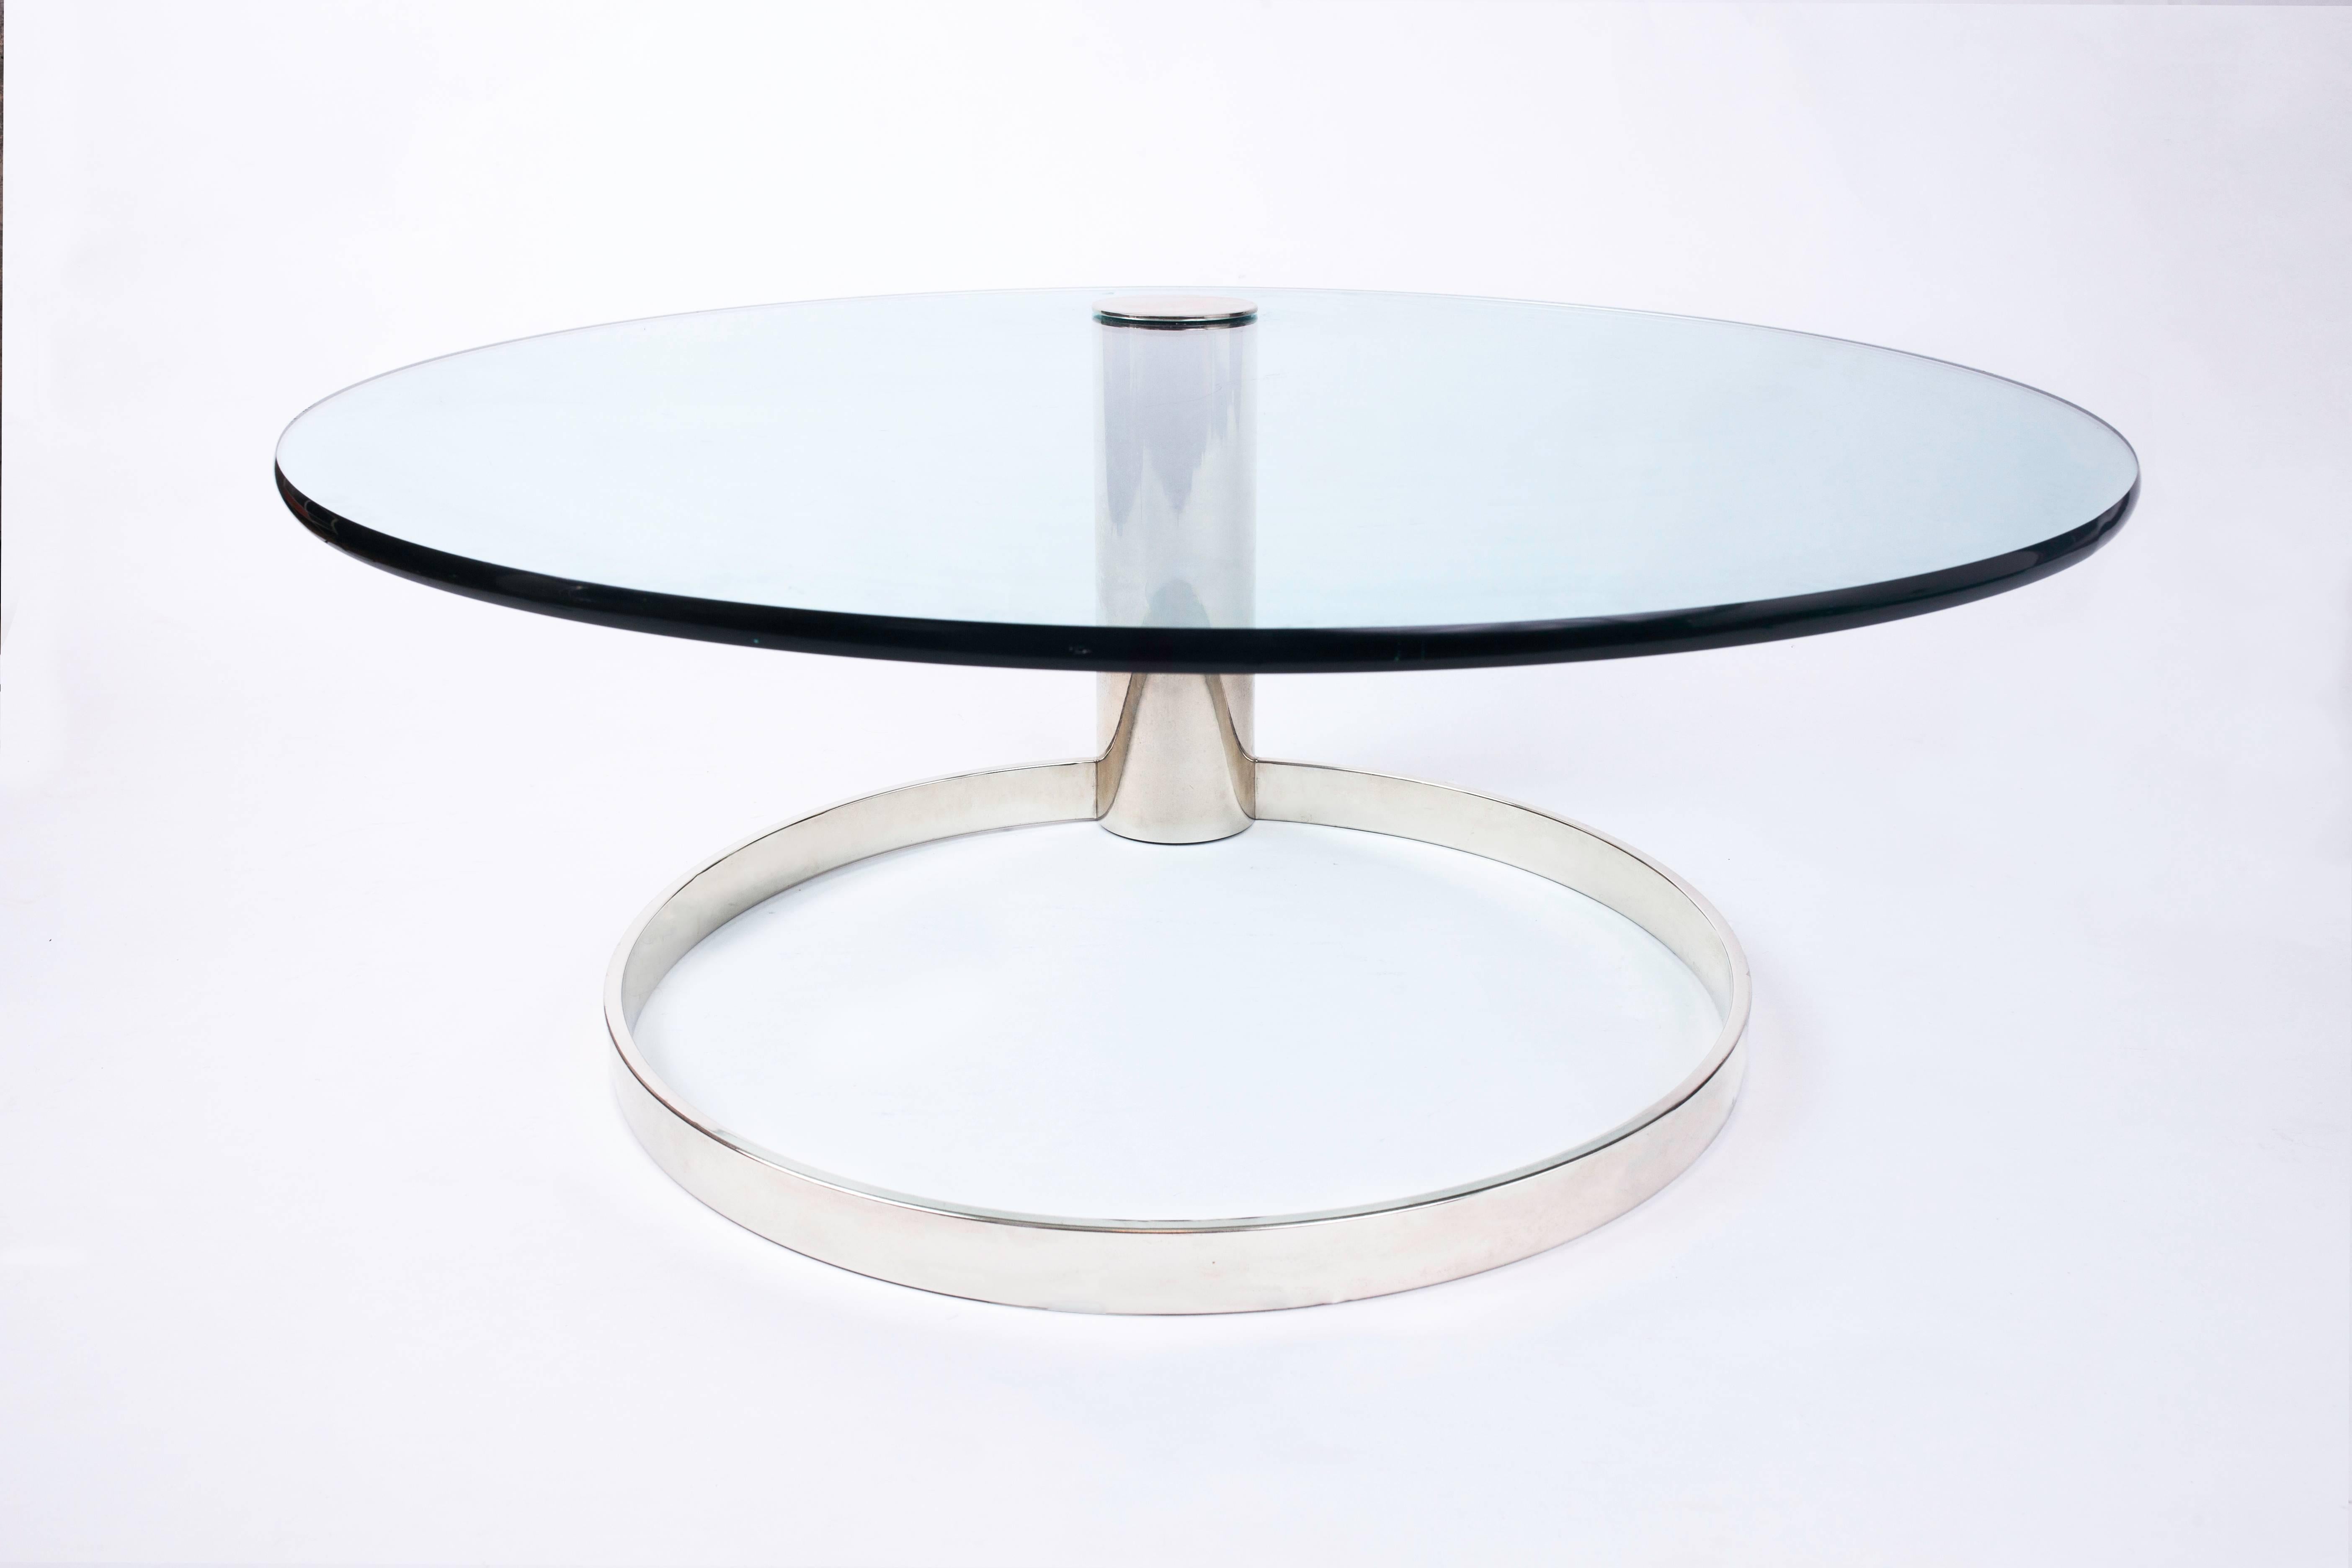 Floating circular glass and chrome coffee table by Leon Rosen for Pace, with a dynamically cantilevered top projecting out from an architectural, ring-shaped base. A skillfully balanced Minimalist design.
 